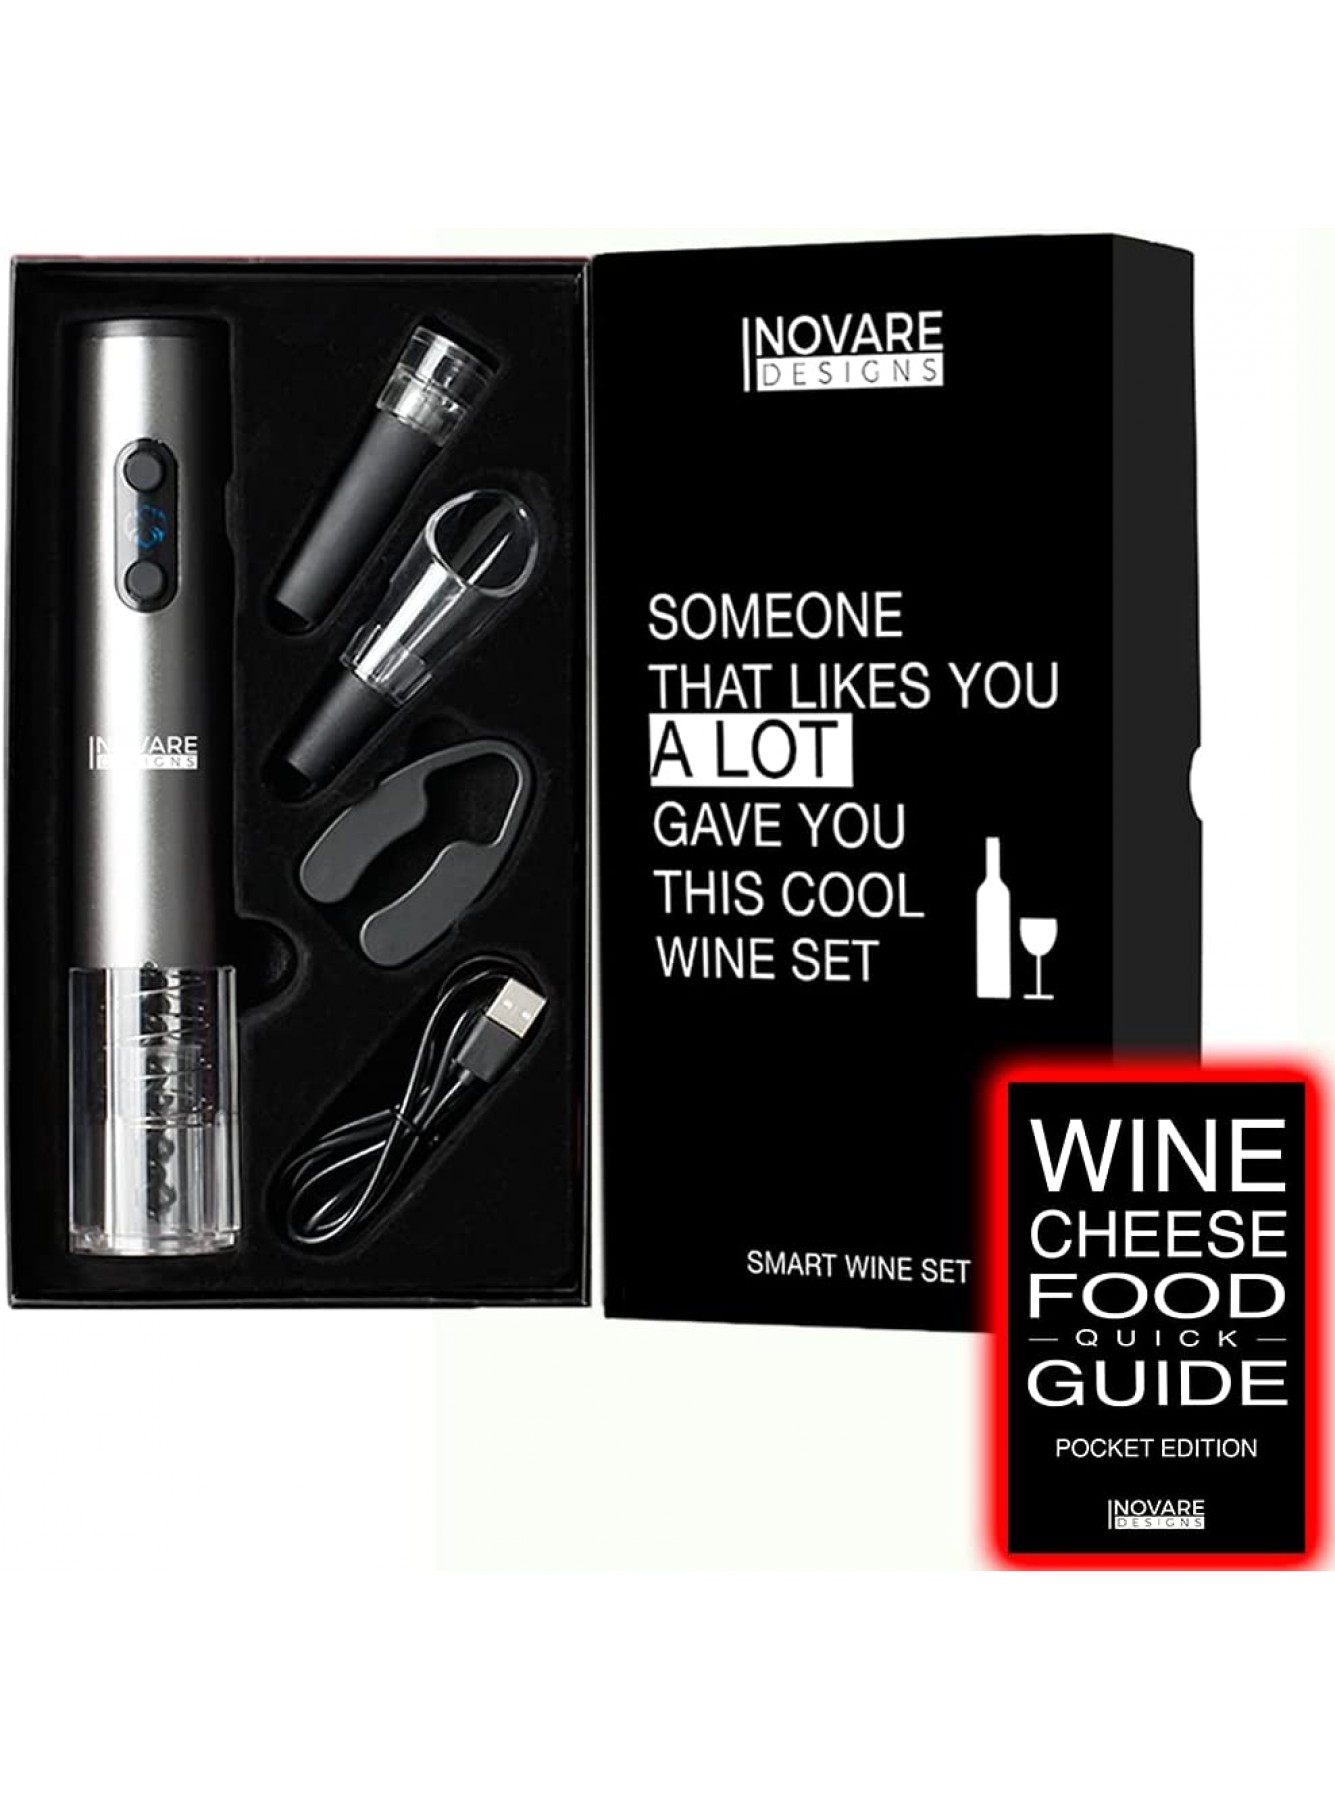 Gift for Wine Lover Unique Wine Pairing Guide Rechargeable Electric Opener Automatic Electronic Bottle Set Tasting Kit Accessories Stopper Aerator Pourer Vacuum Preserver Foil Cutter B08BKZHJGZ